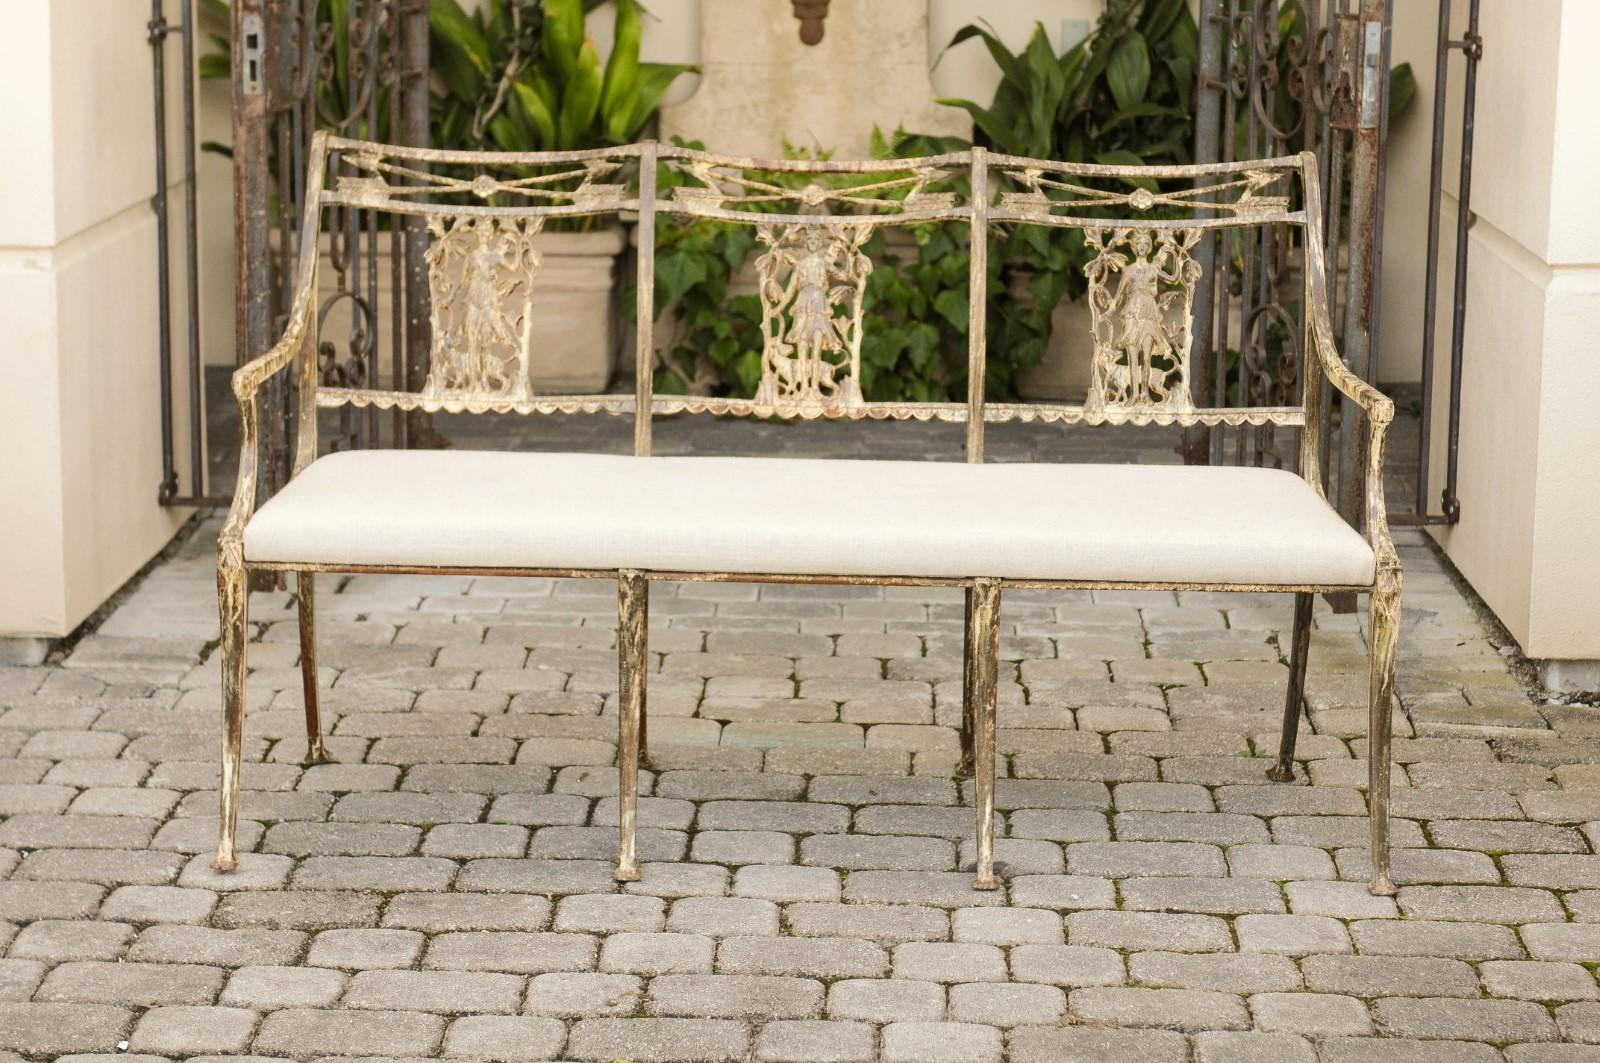 English Vintage Wrought-Iron Diana the Huntress Pattern Garden Bench with Upholstery